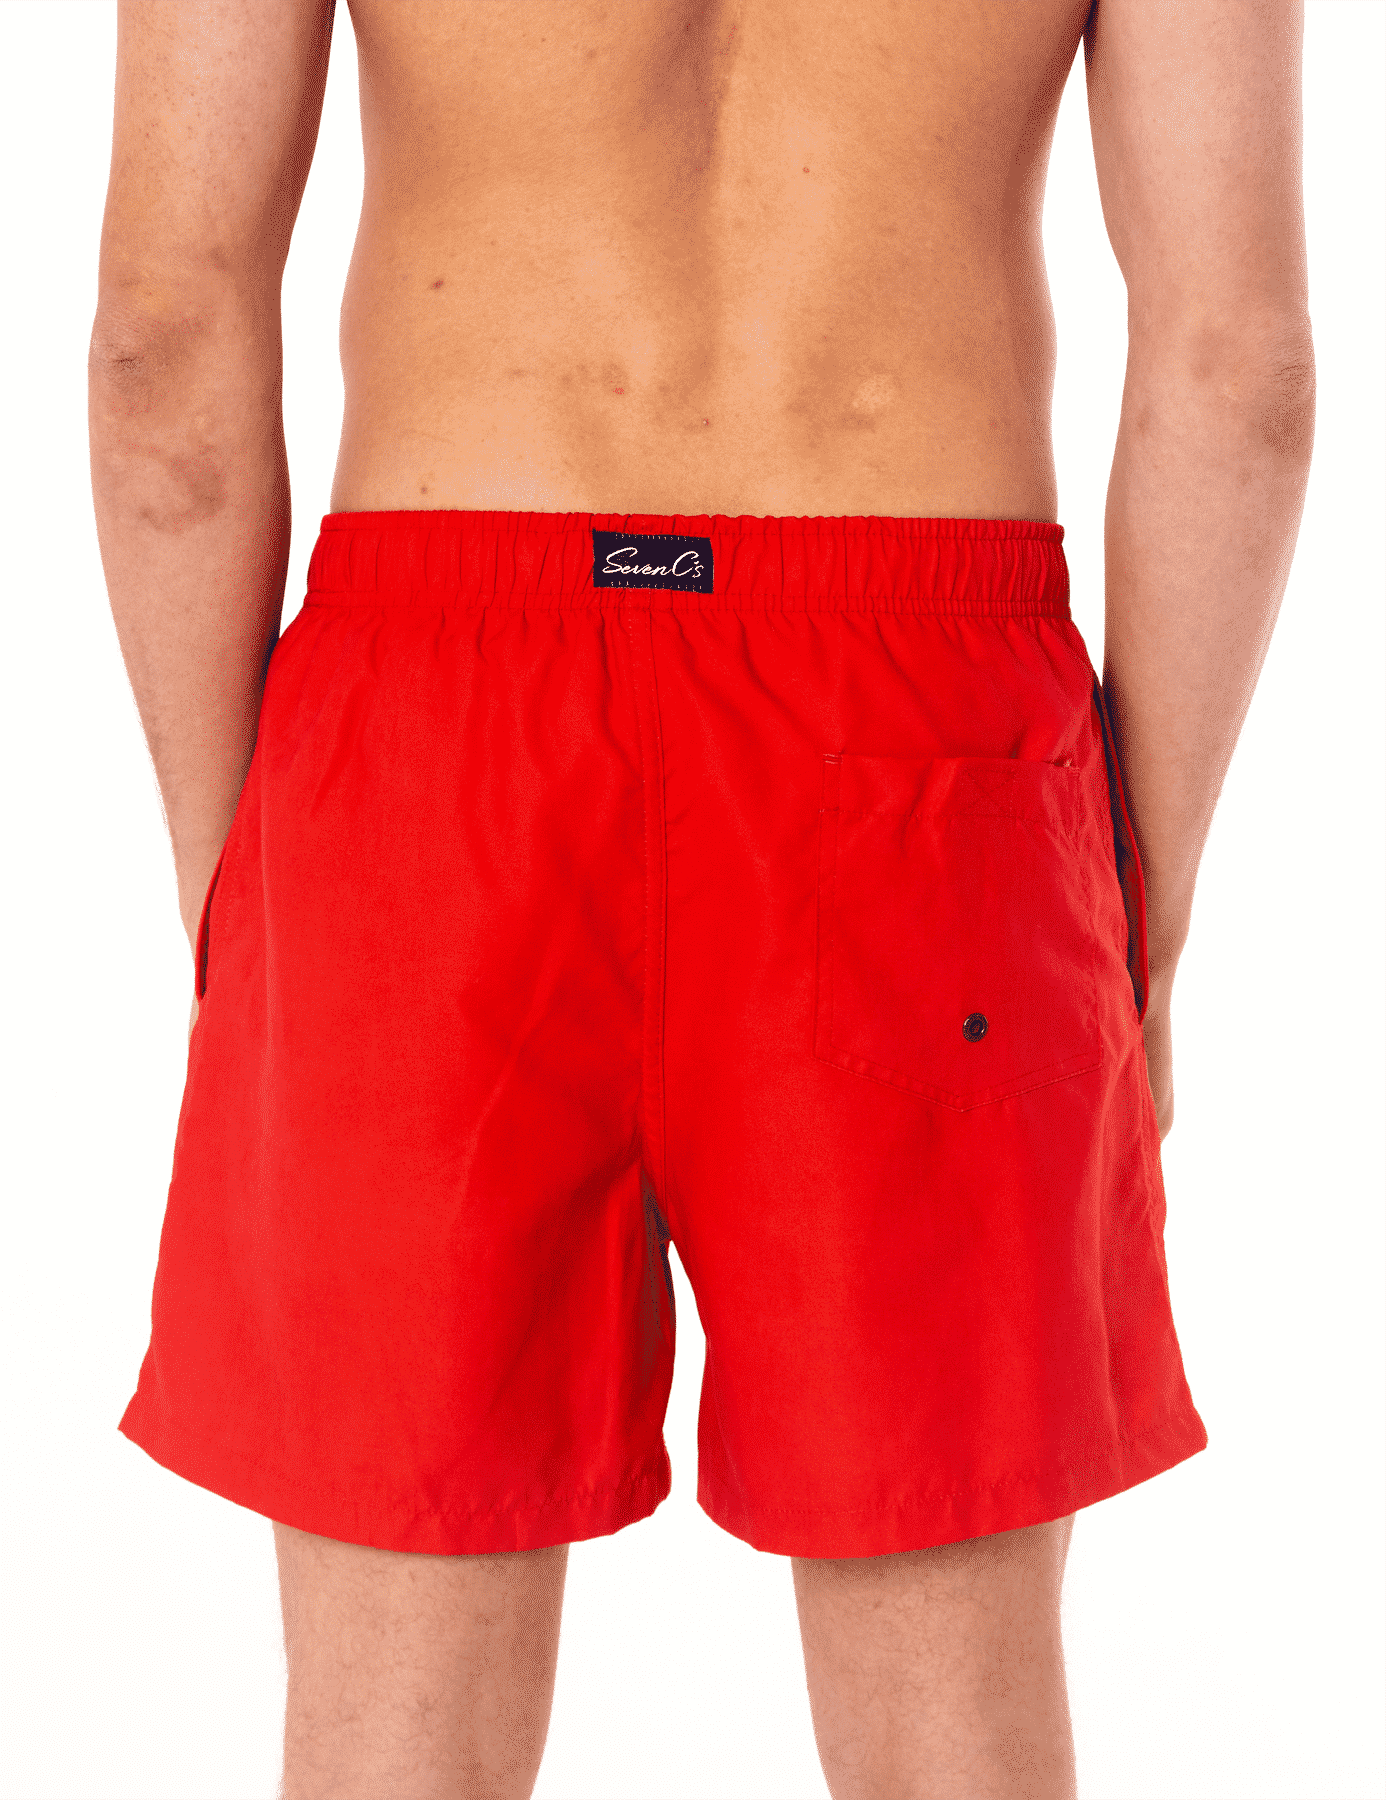 Sustainable Men's Red Shorts from SevenC's  - Back View